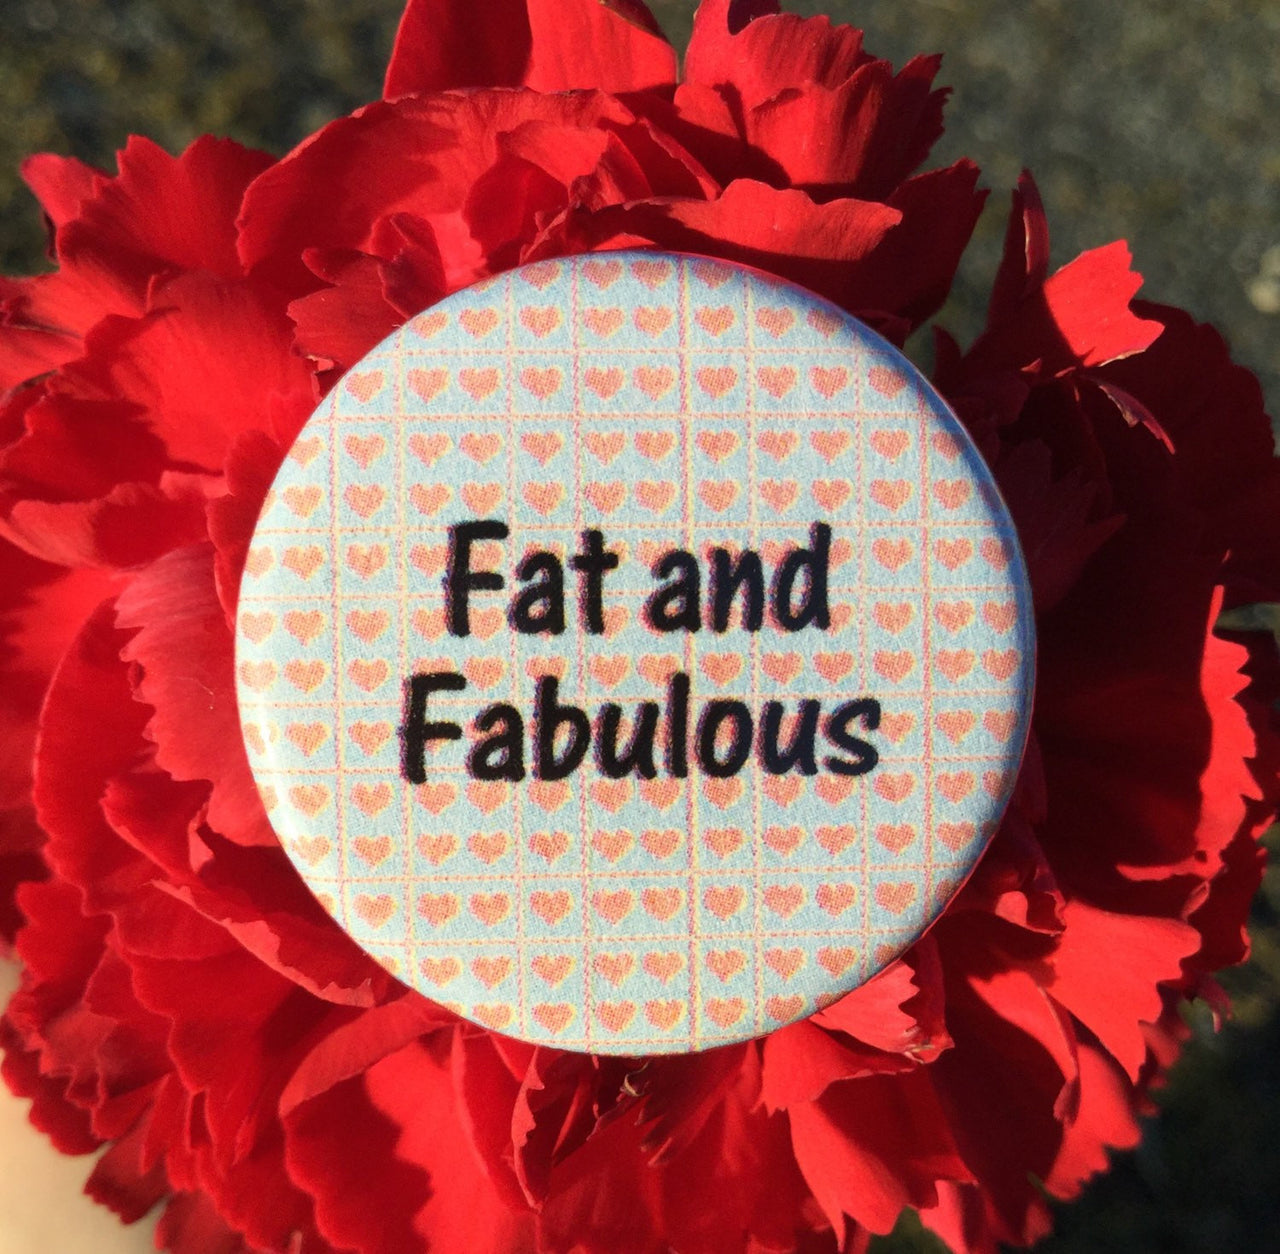 Fat and fabulous / Body positivity button - Radical Buttons